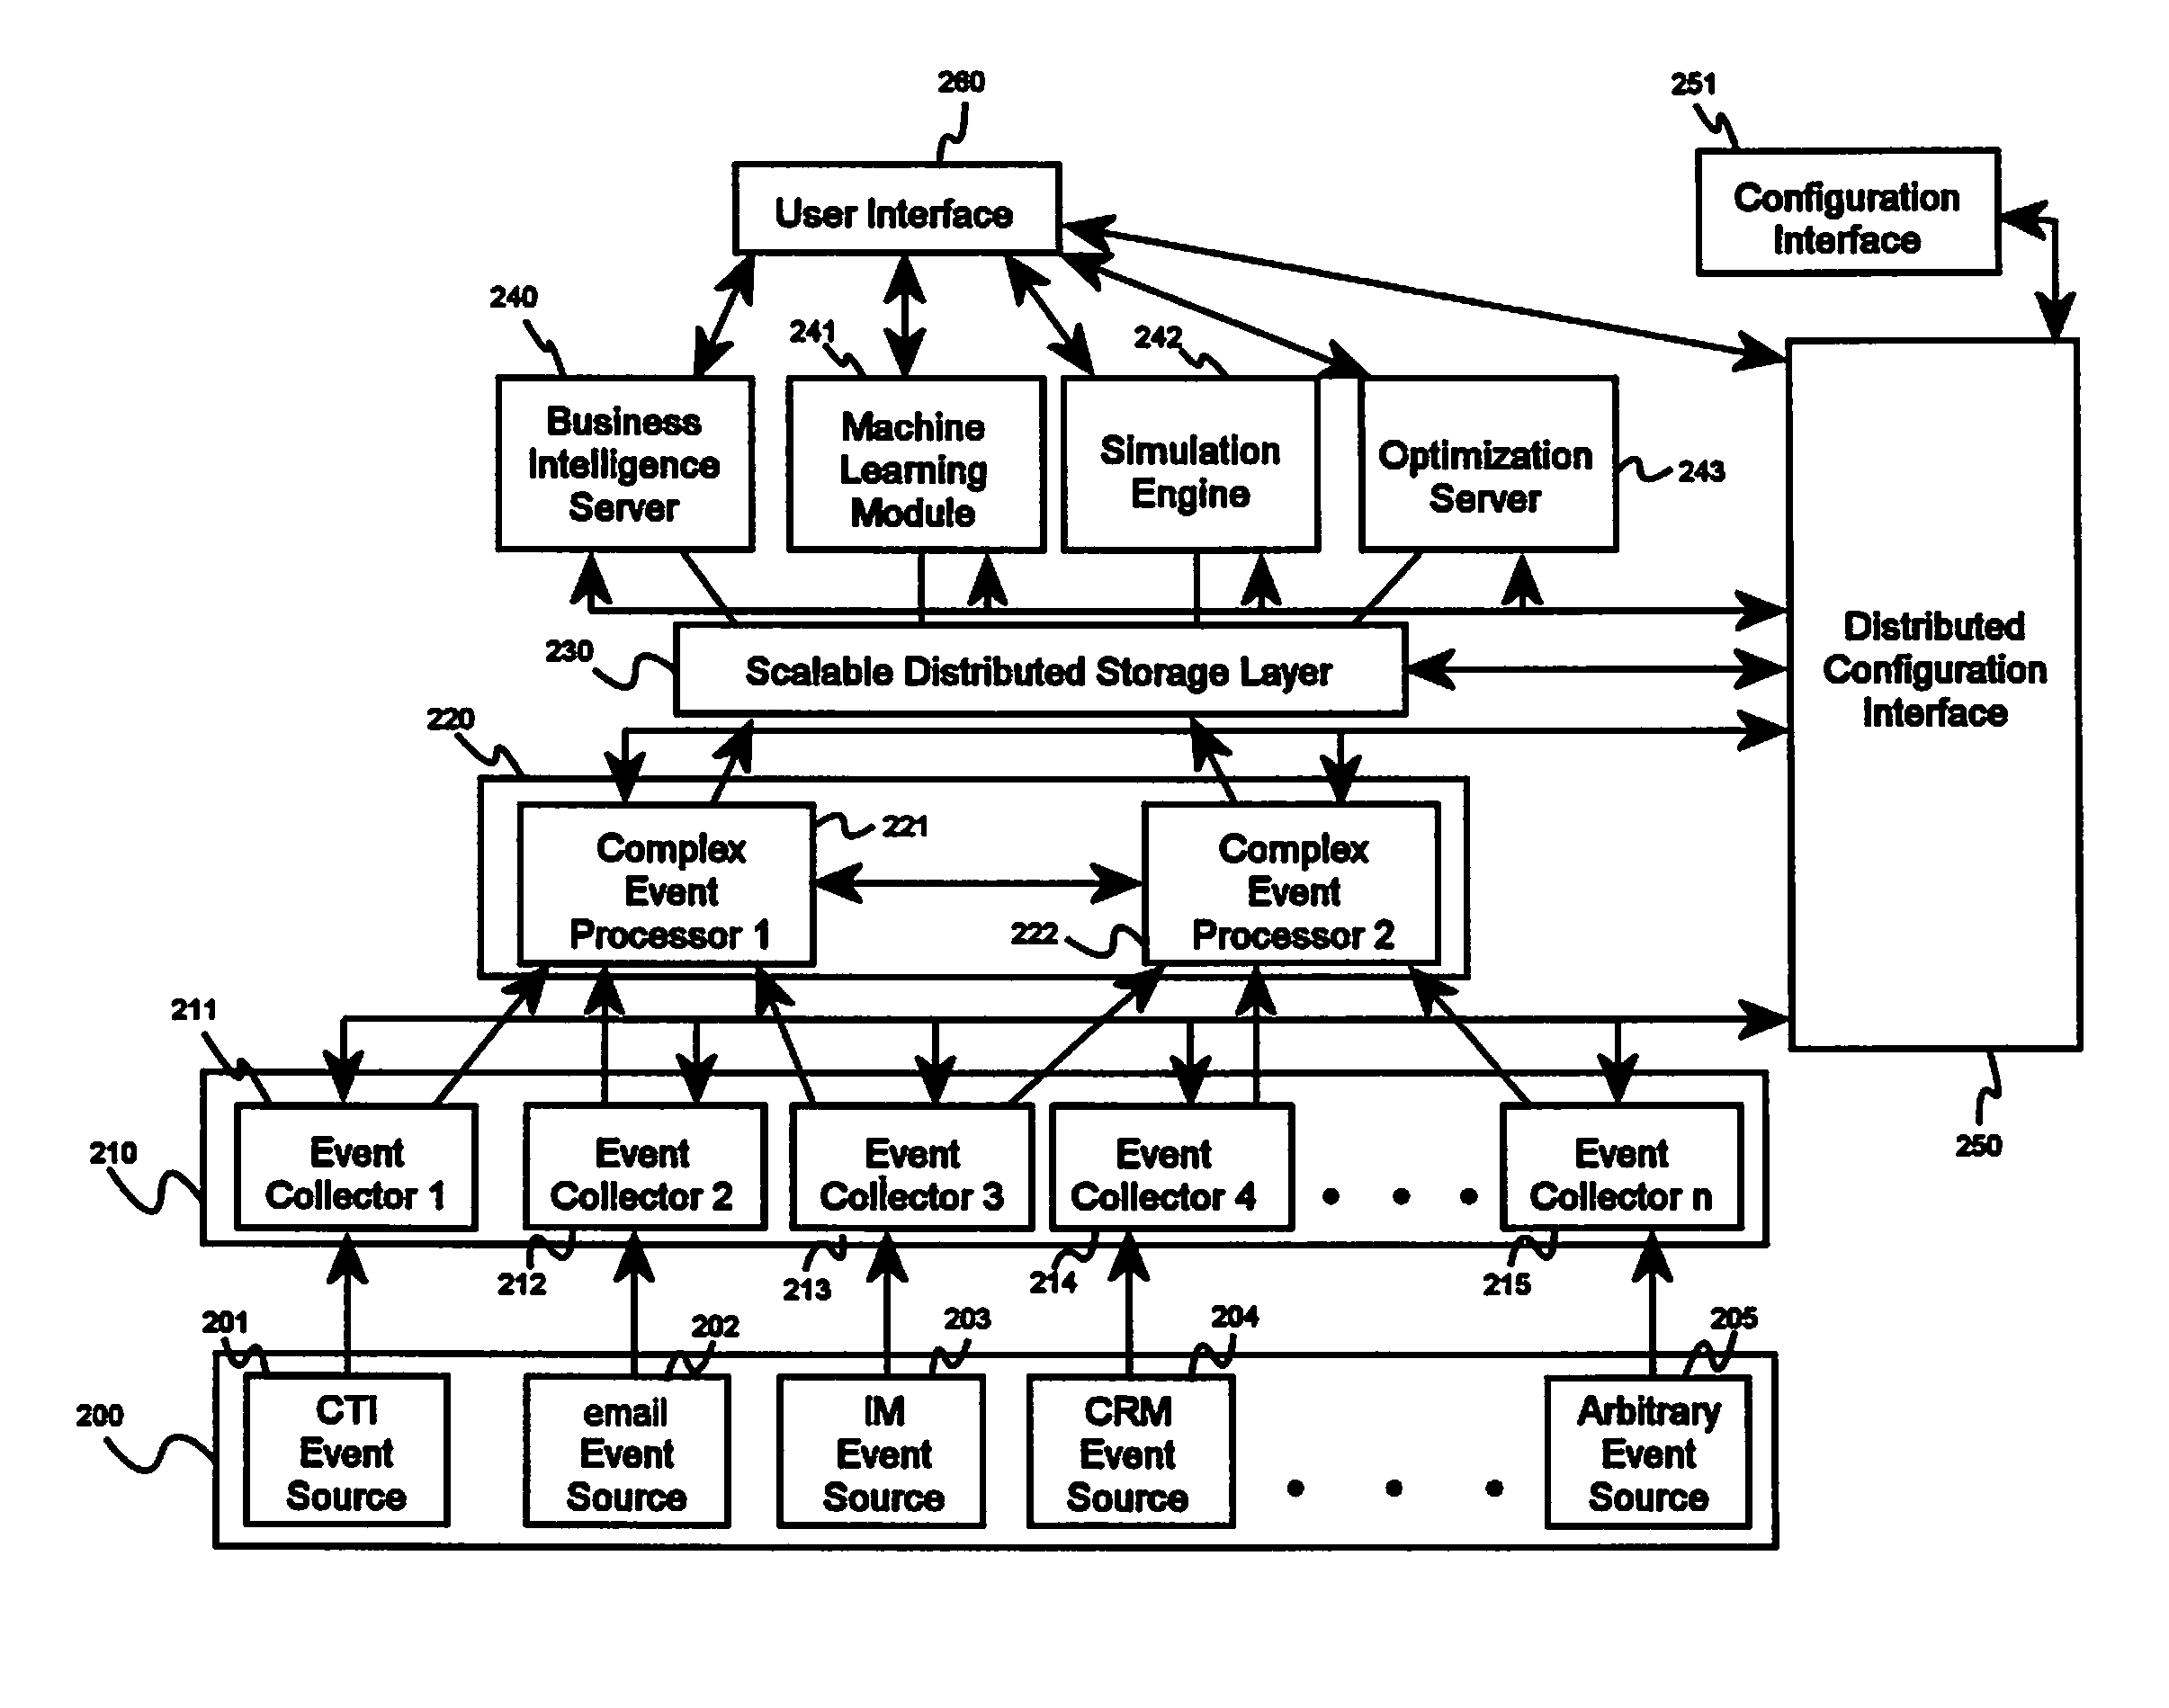 System and method for conducting real-time and historical analysis of complex customer care processes